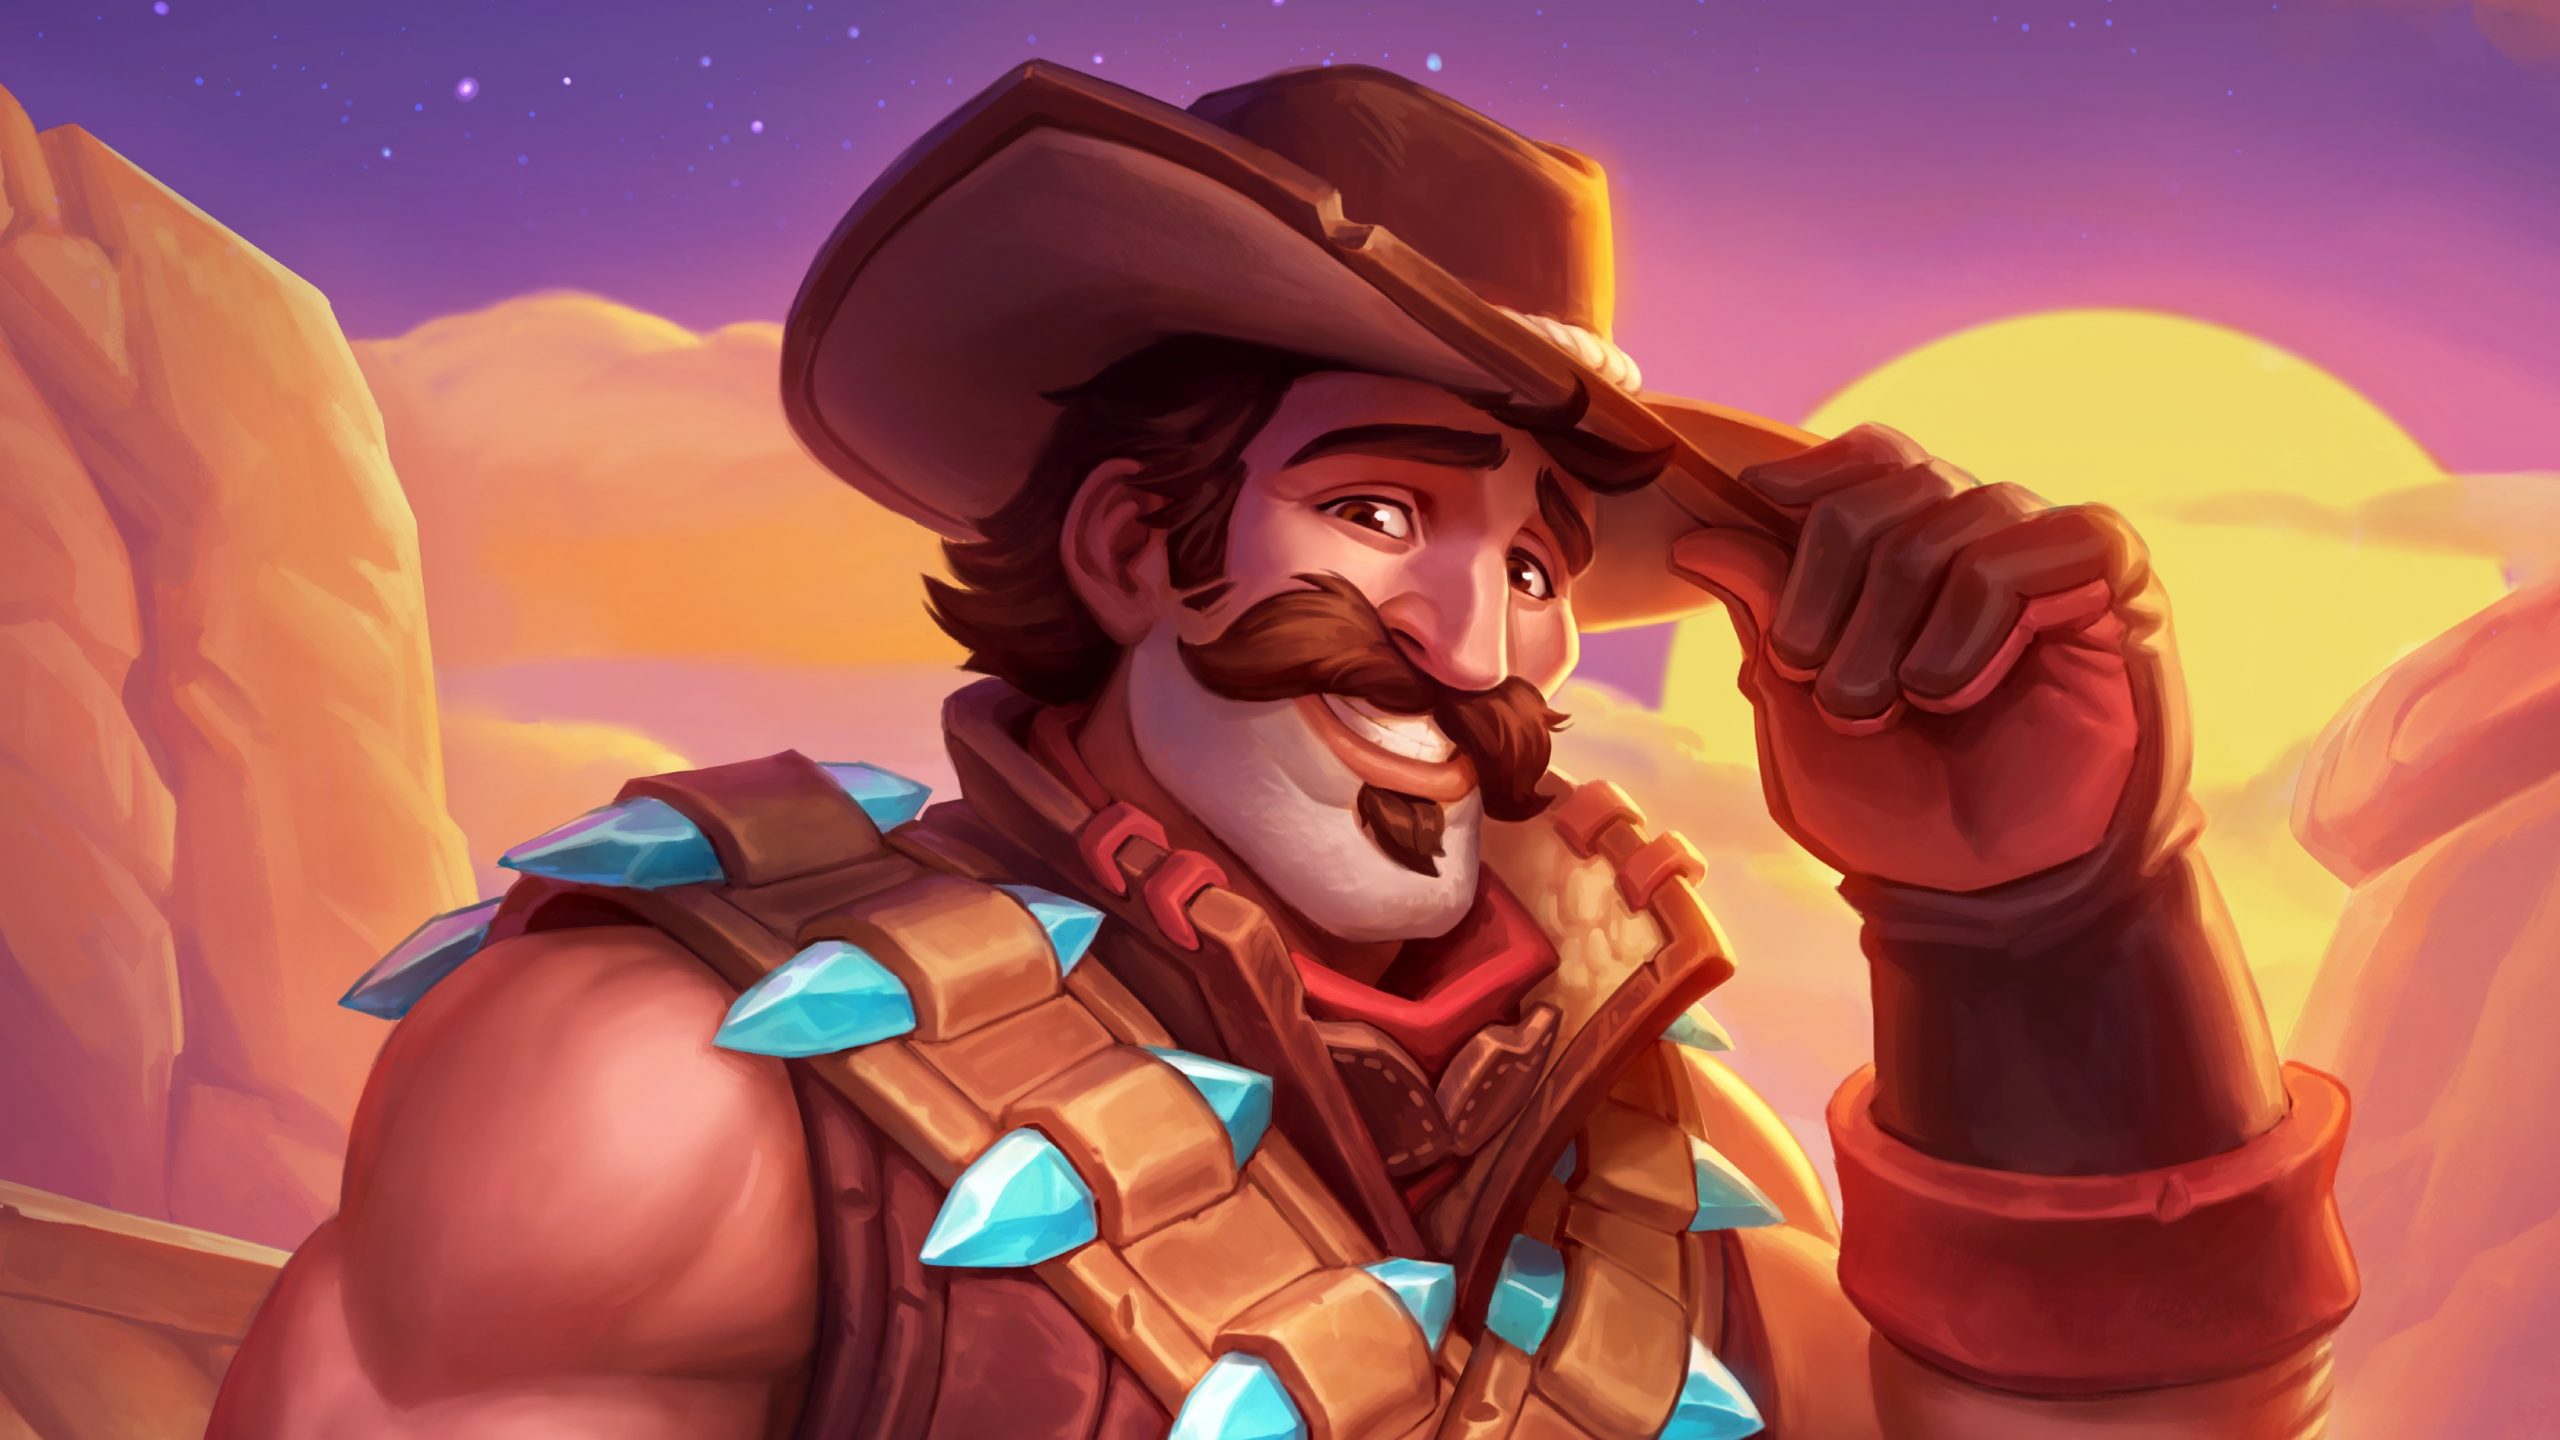 Hearthstone is adding new ‘Catch Up’ packs containing up to 50 cards, Battlegrounds to get a ‘Duos’ mode early next year